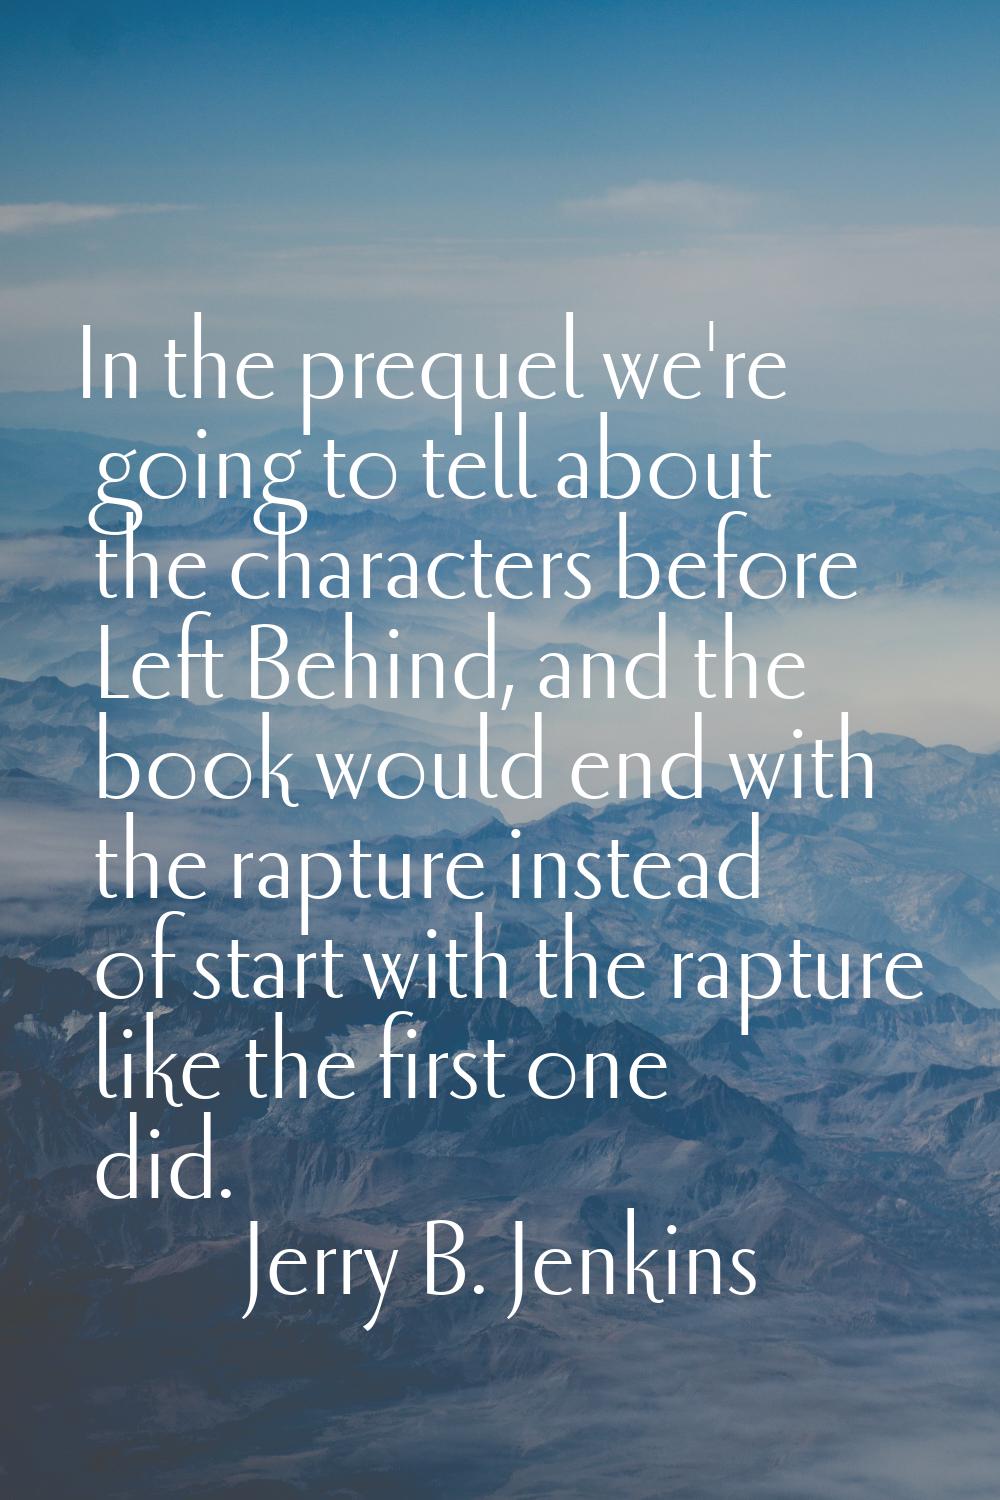 In the prequel we're going to tell about the characters before Left Behind, and the book would end 